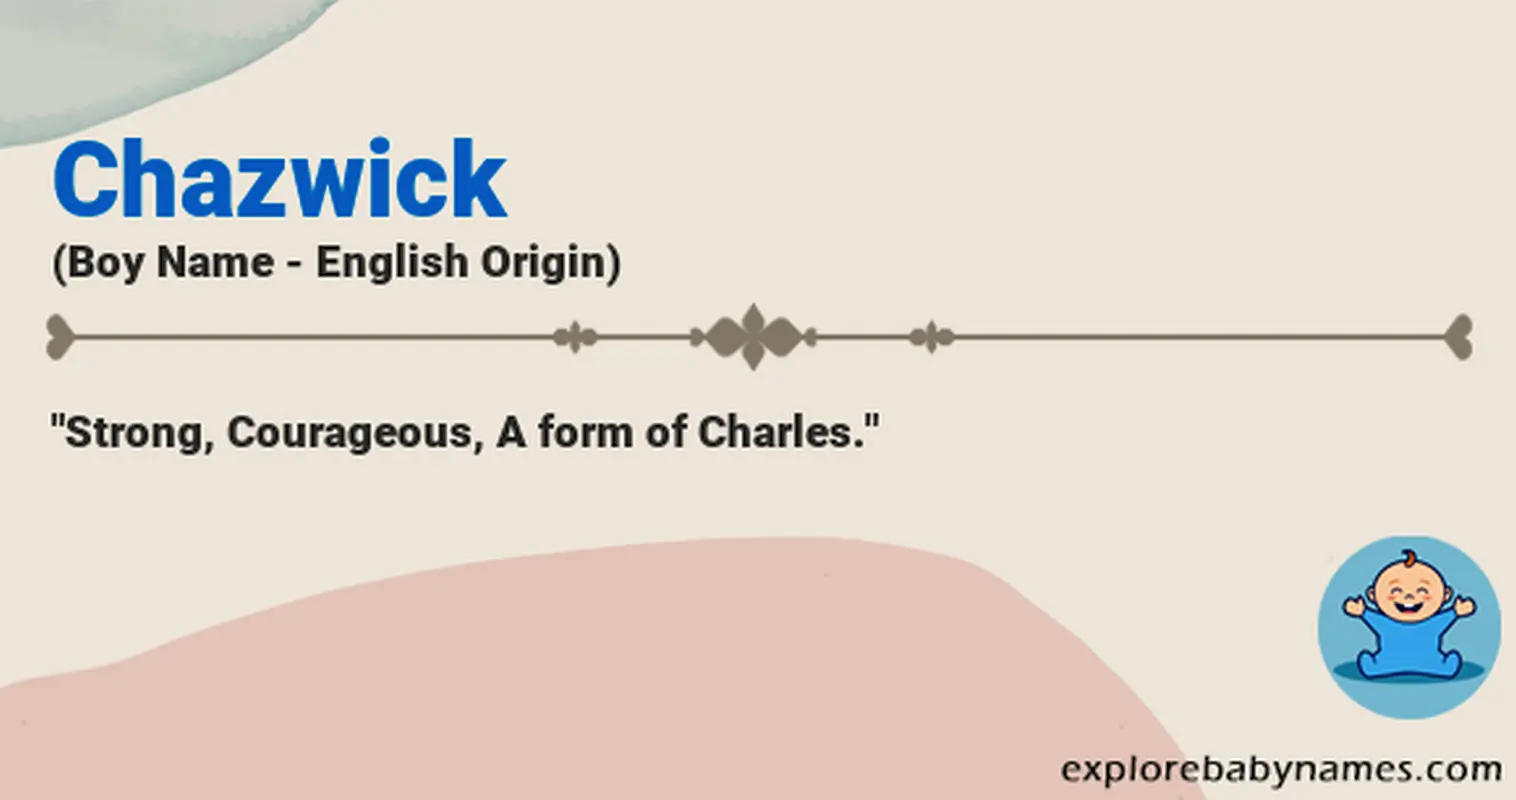 Meaning of Chazwick